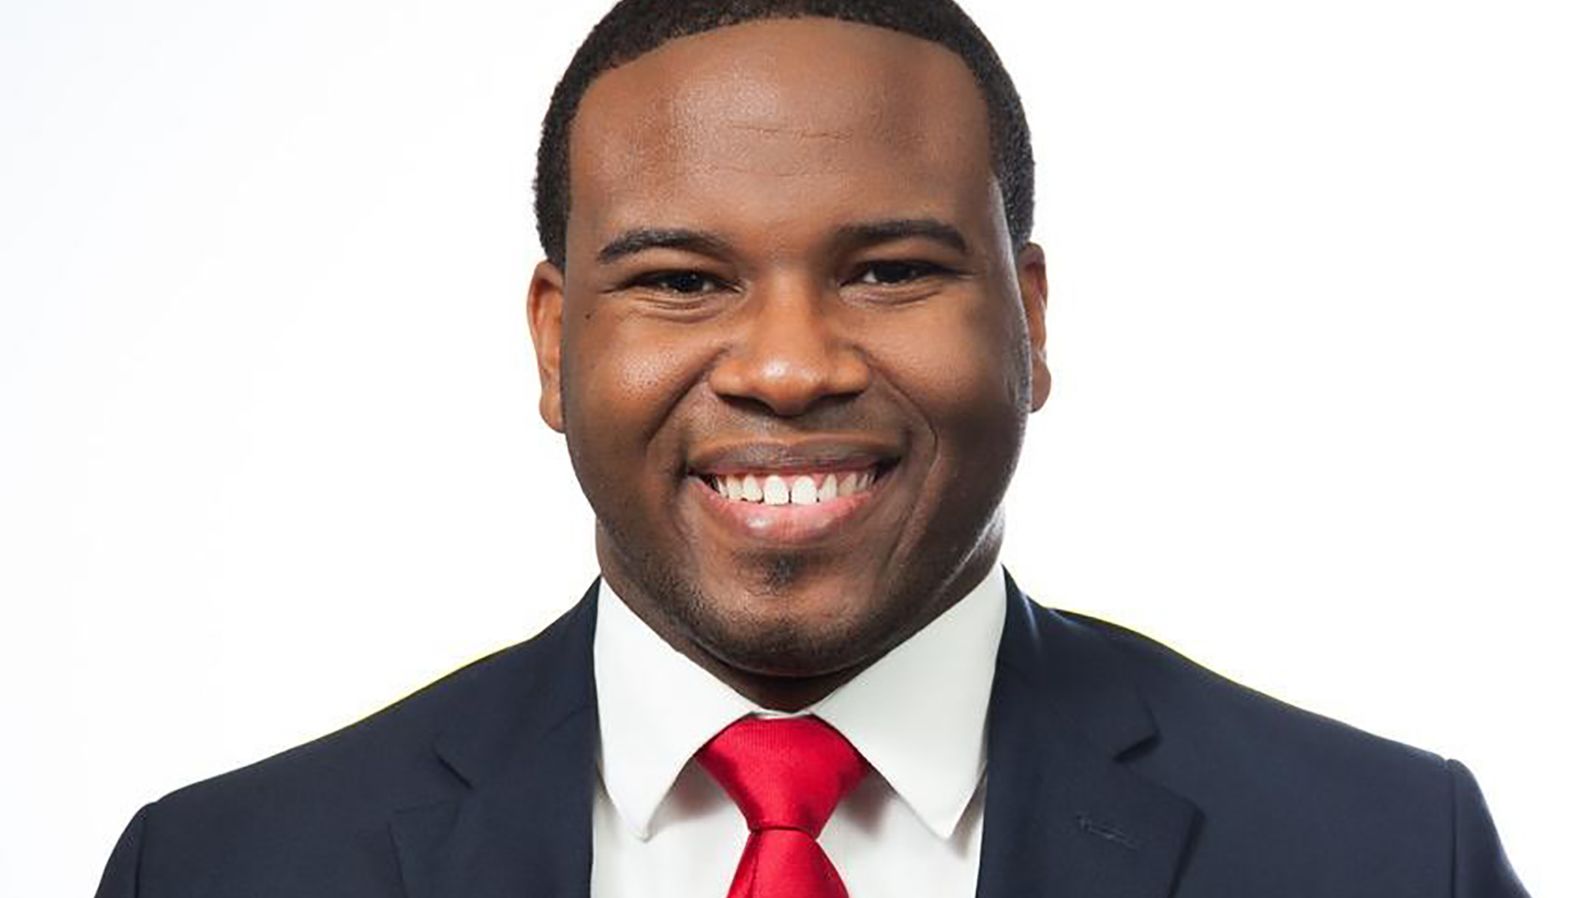 Botham Jean was in his own apartment when Guyger shot him.